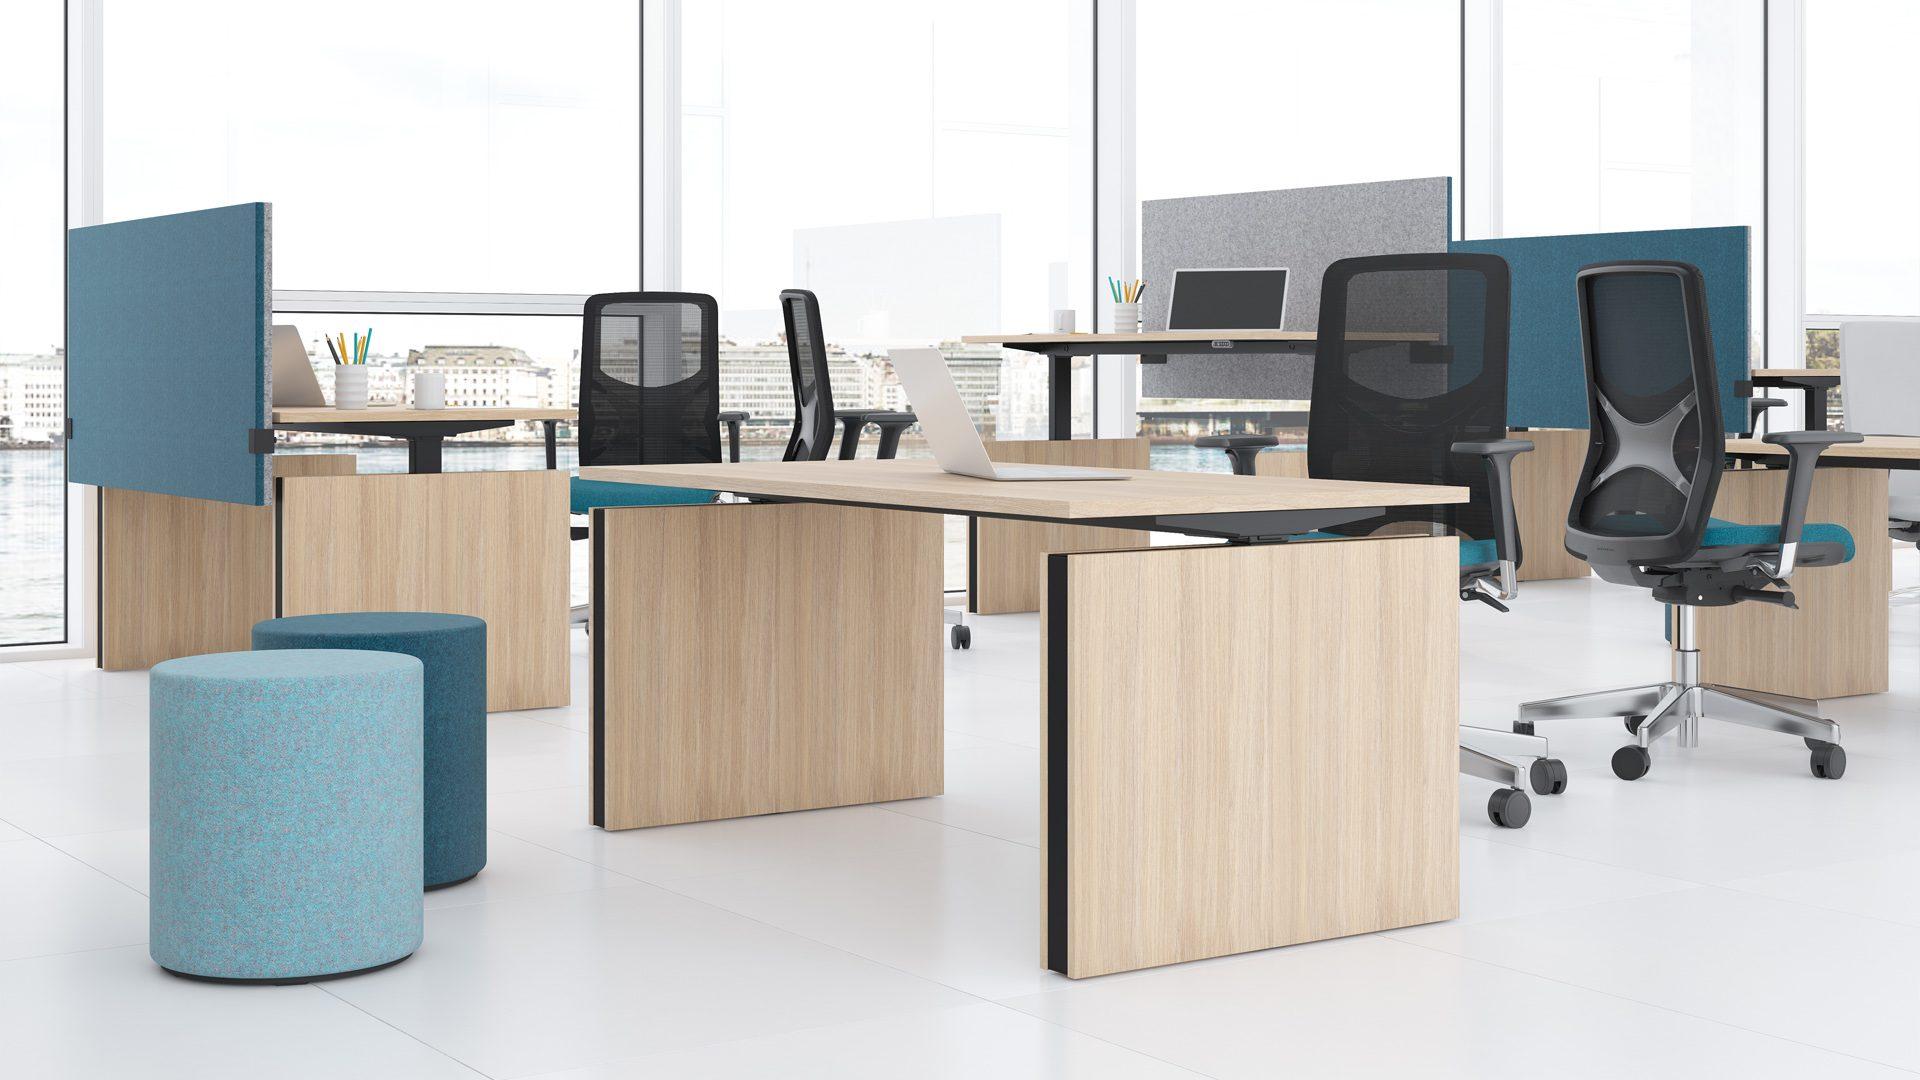 Create an ergonomic sit/stand workspace with Motion desks